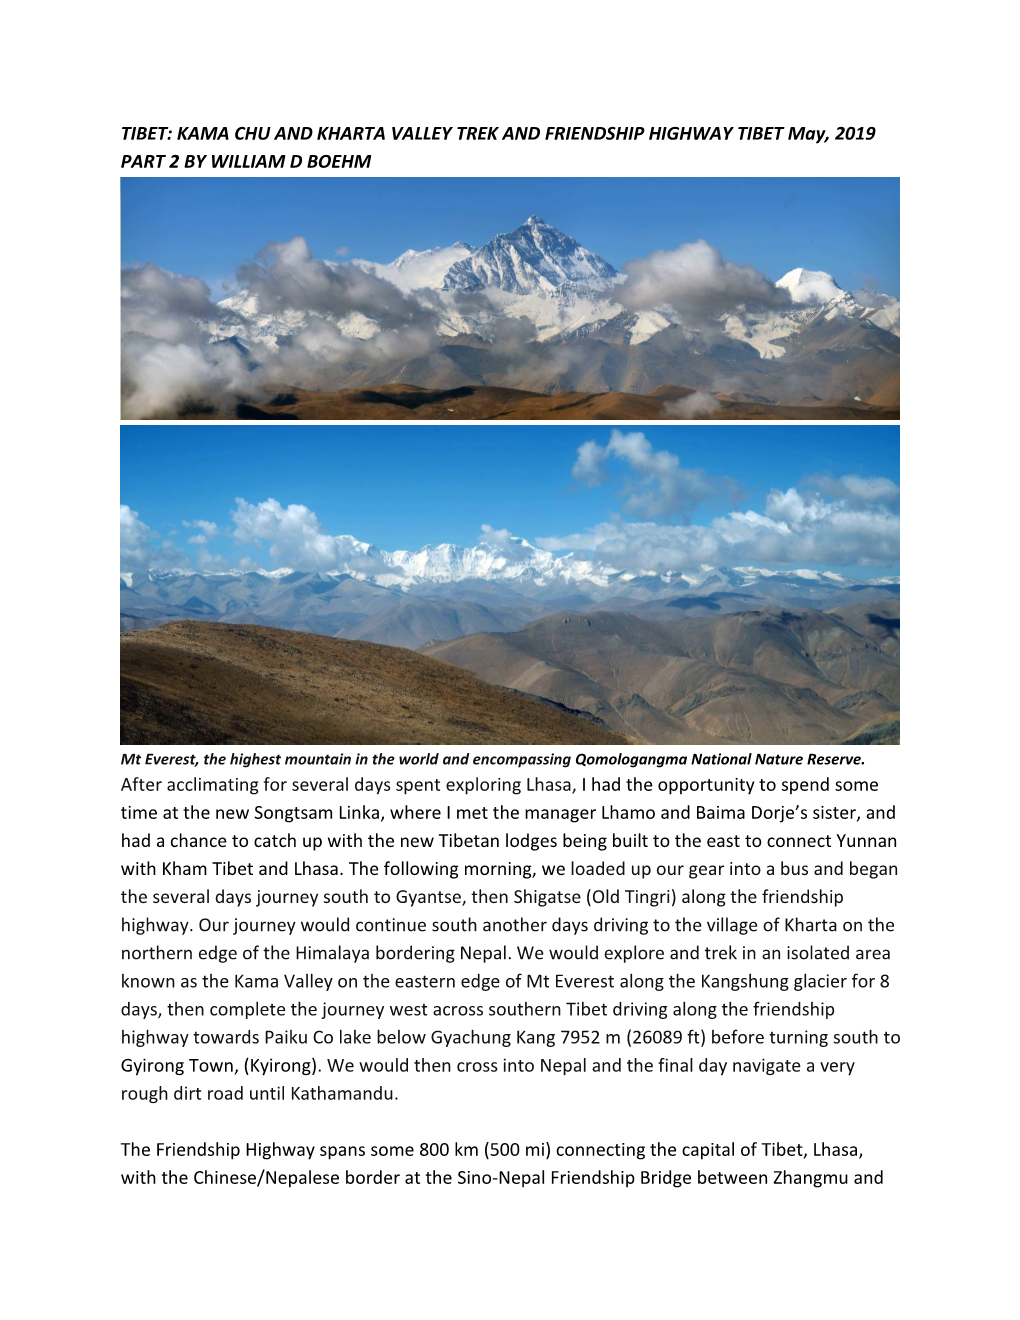 KAMA CHU and KHARTA VALLEY TREK and FRIENDSHIP HIGHWAY TIBET May, 2019 PART 2 by WILLIAM D BOEHM